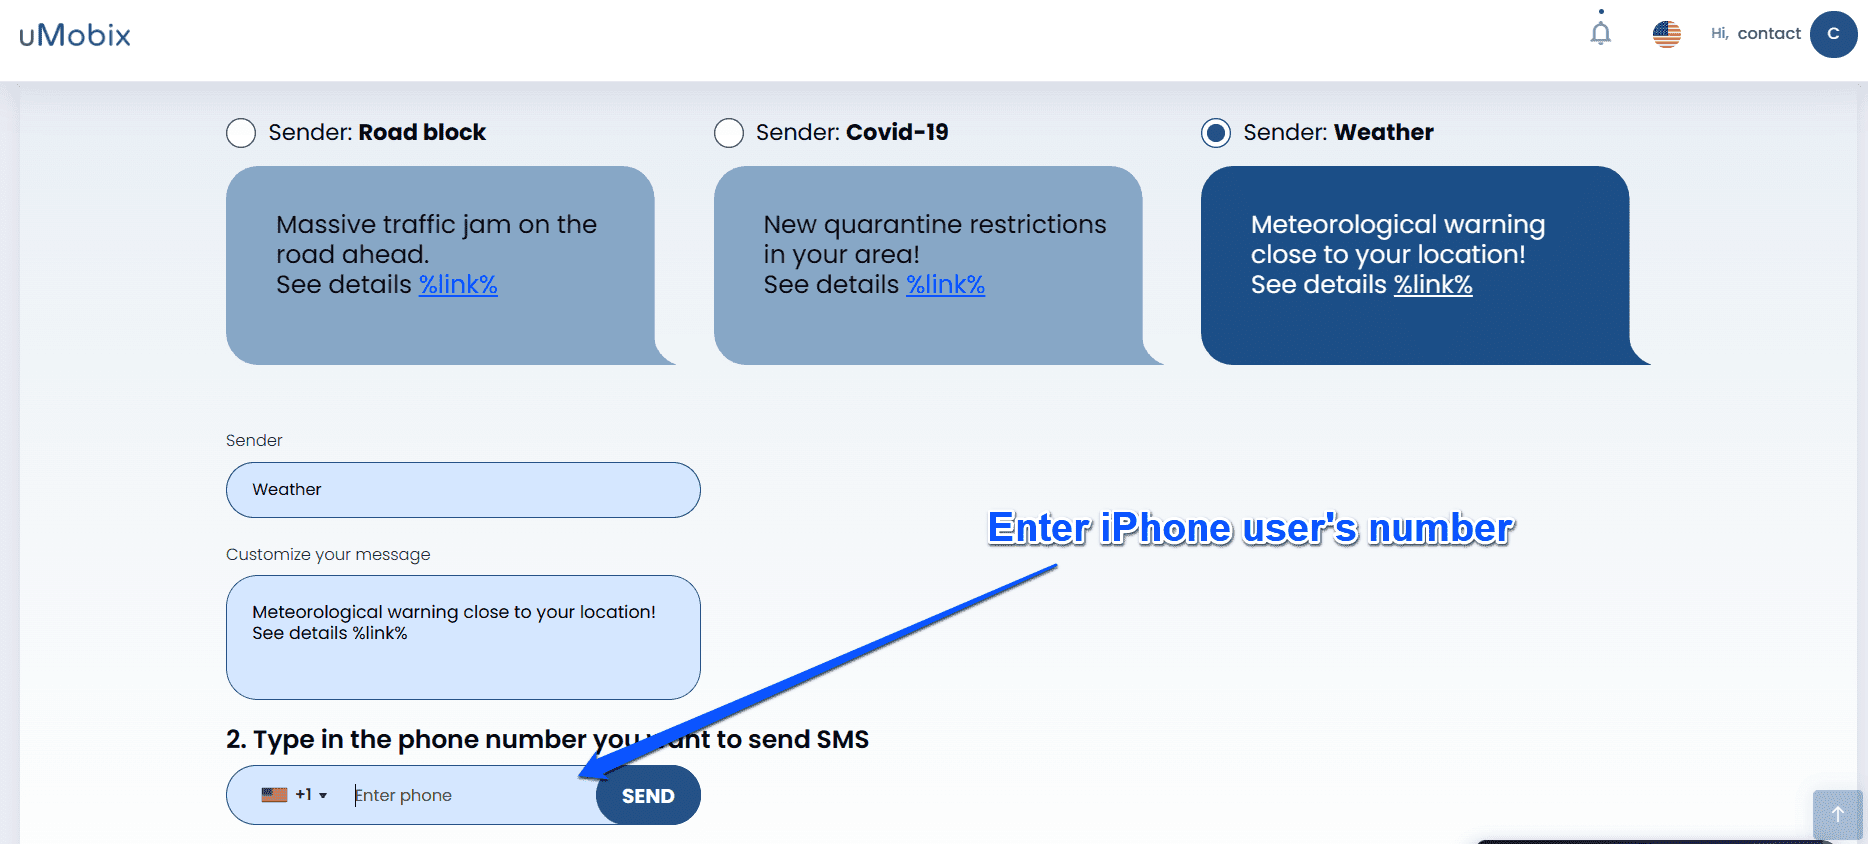 All you have to do is go to GEOfinder and select a prewritten message and then enter the iPhone user number